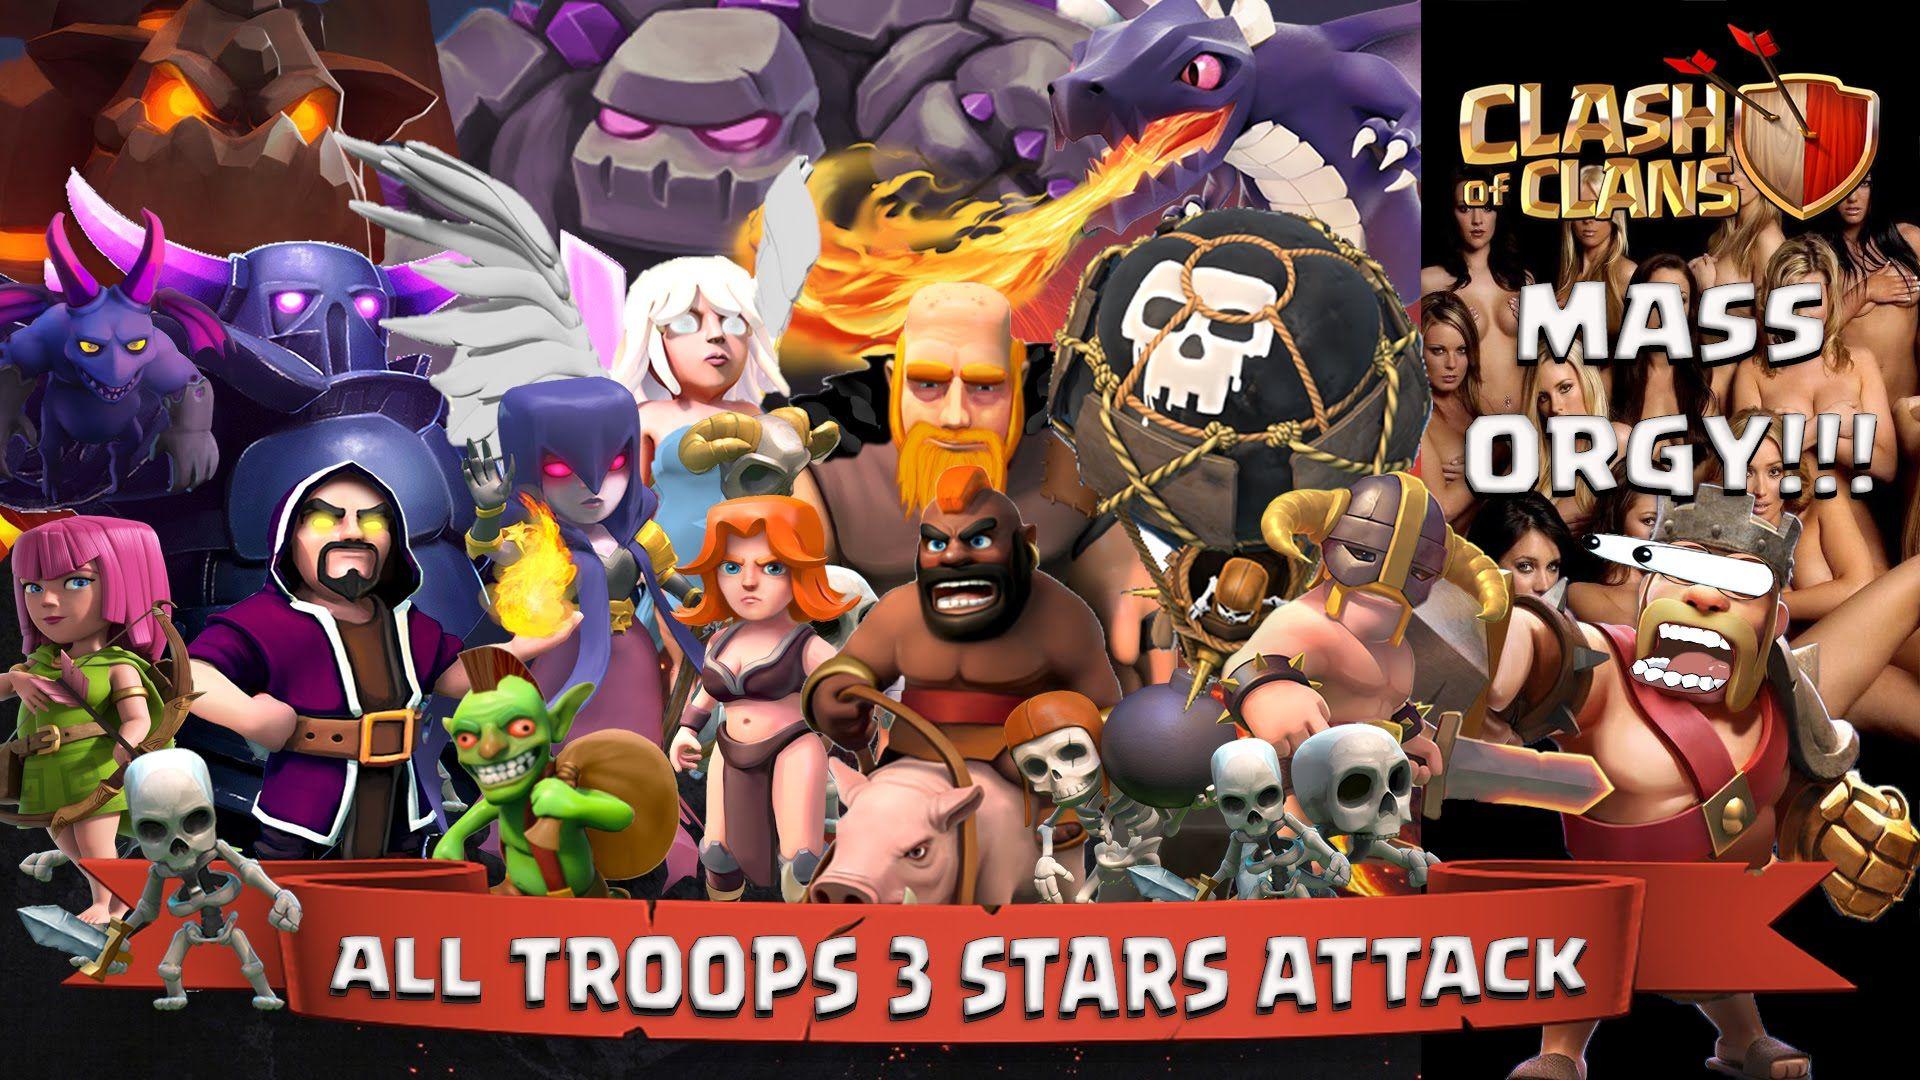 Clash Of Clans: All Troops 3 Stars Attack (Mass Orgy!!!)